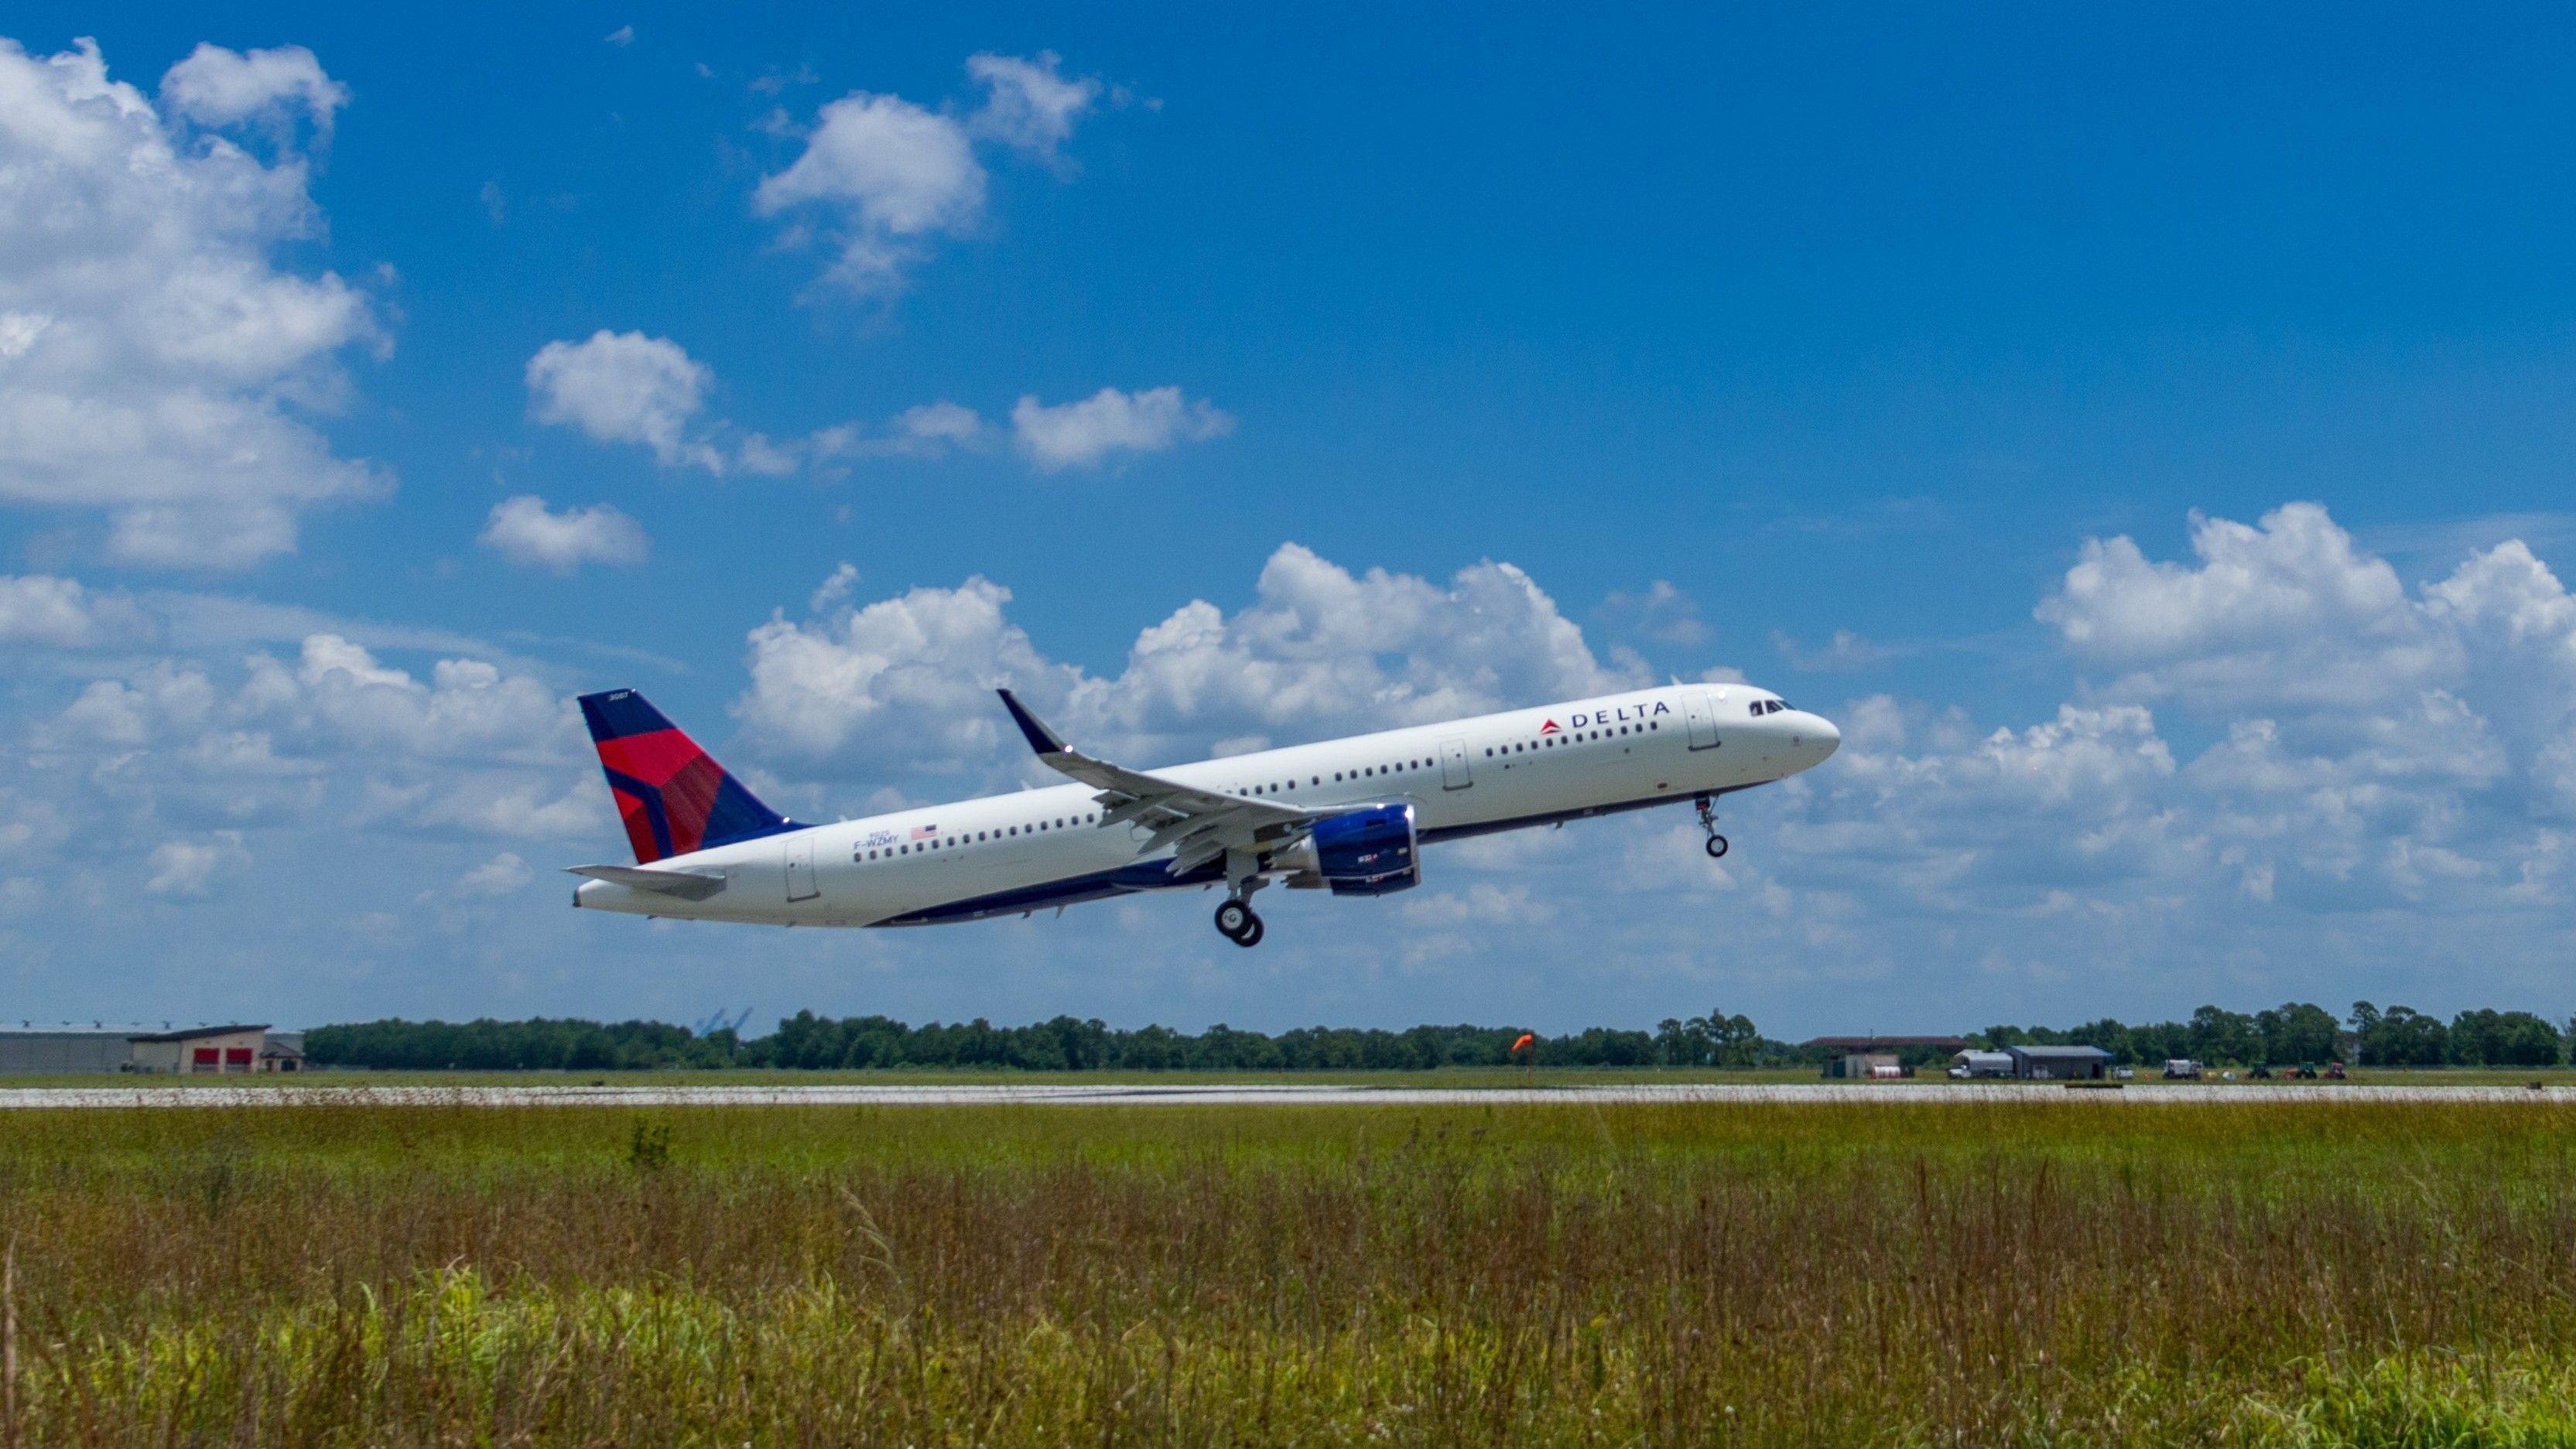 Delta Air Lines Airbus A321 Taking Off